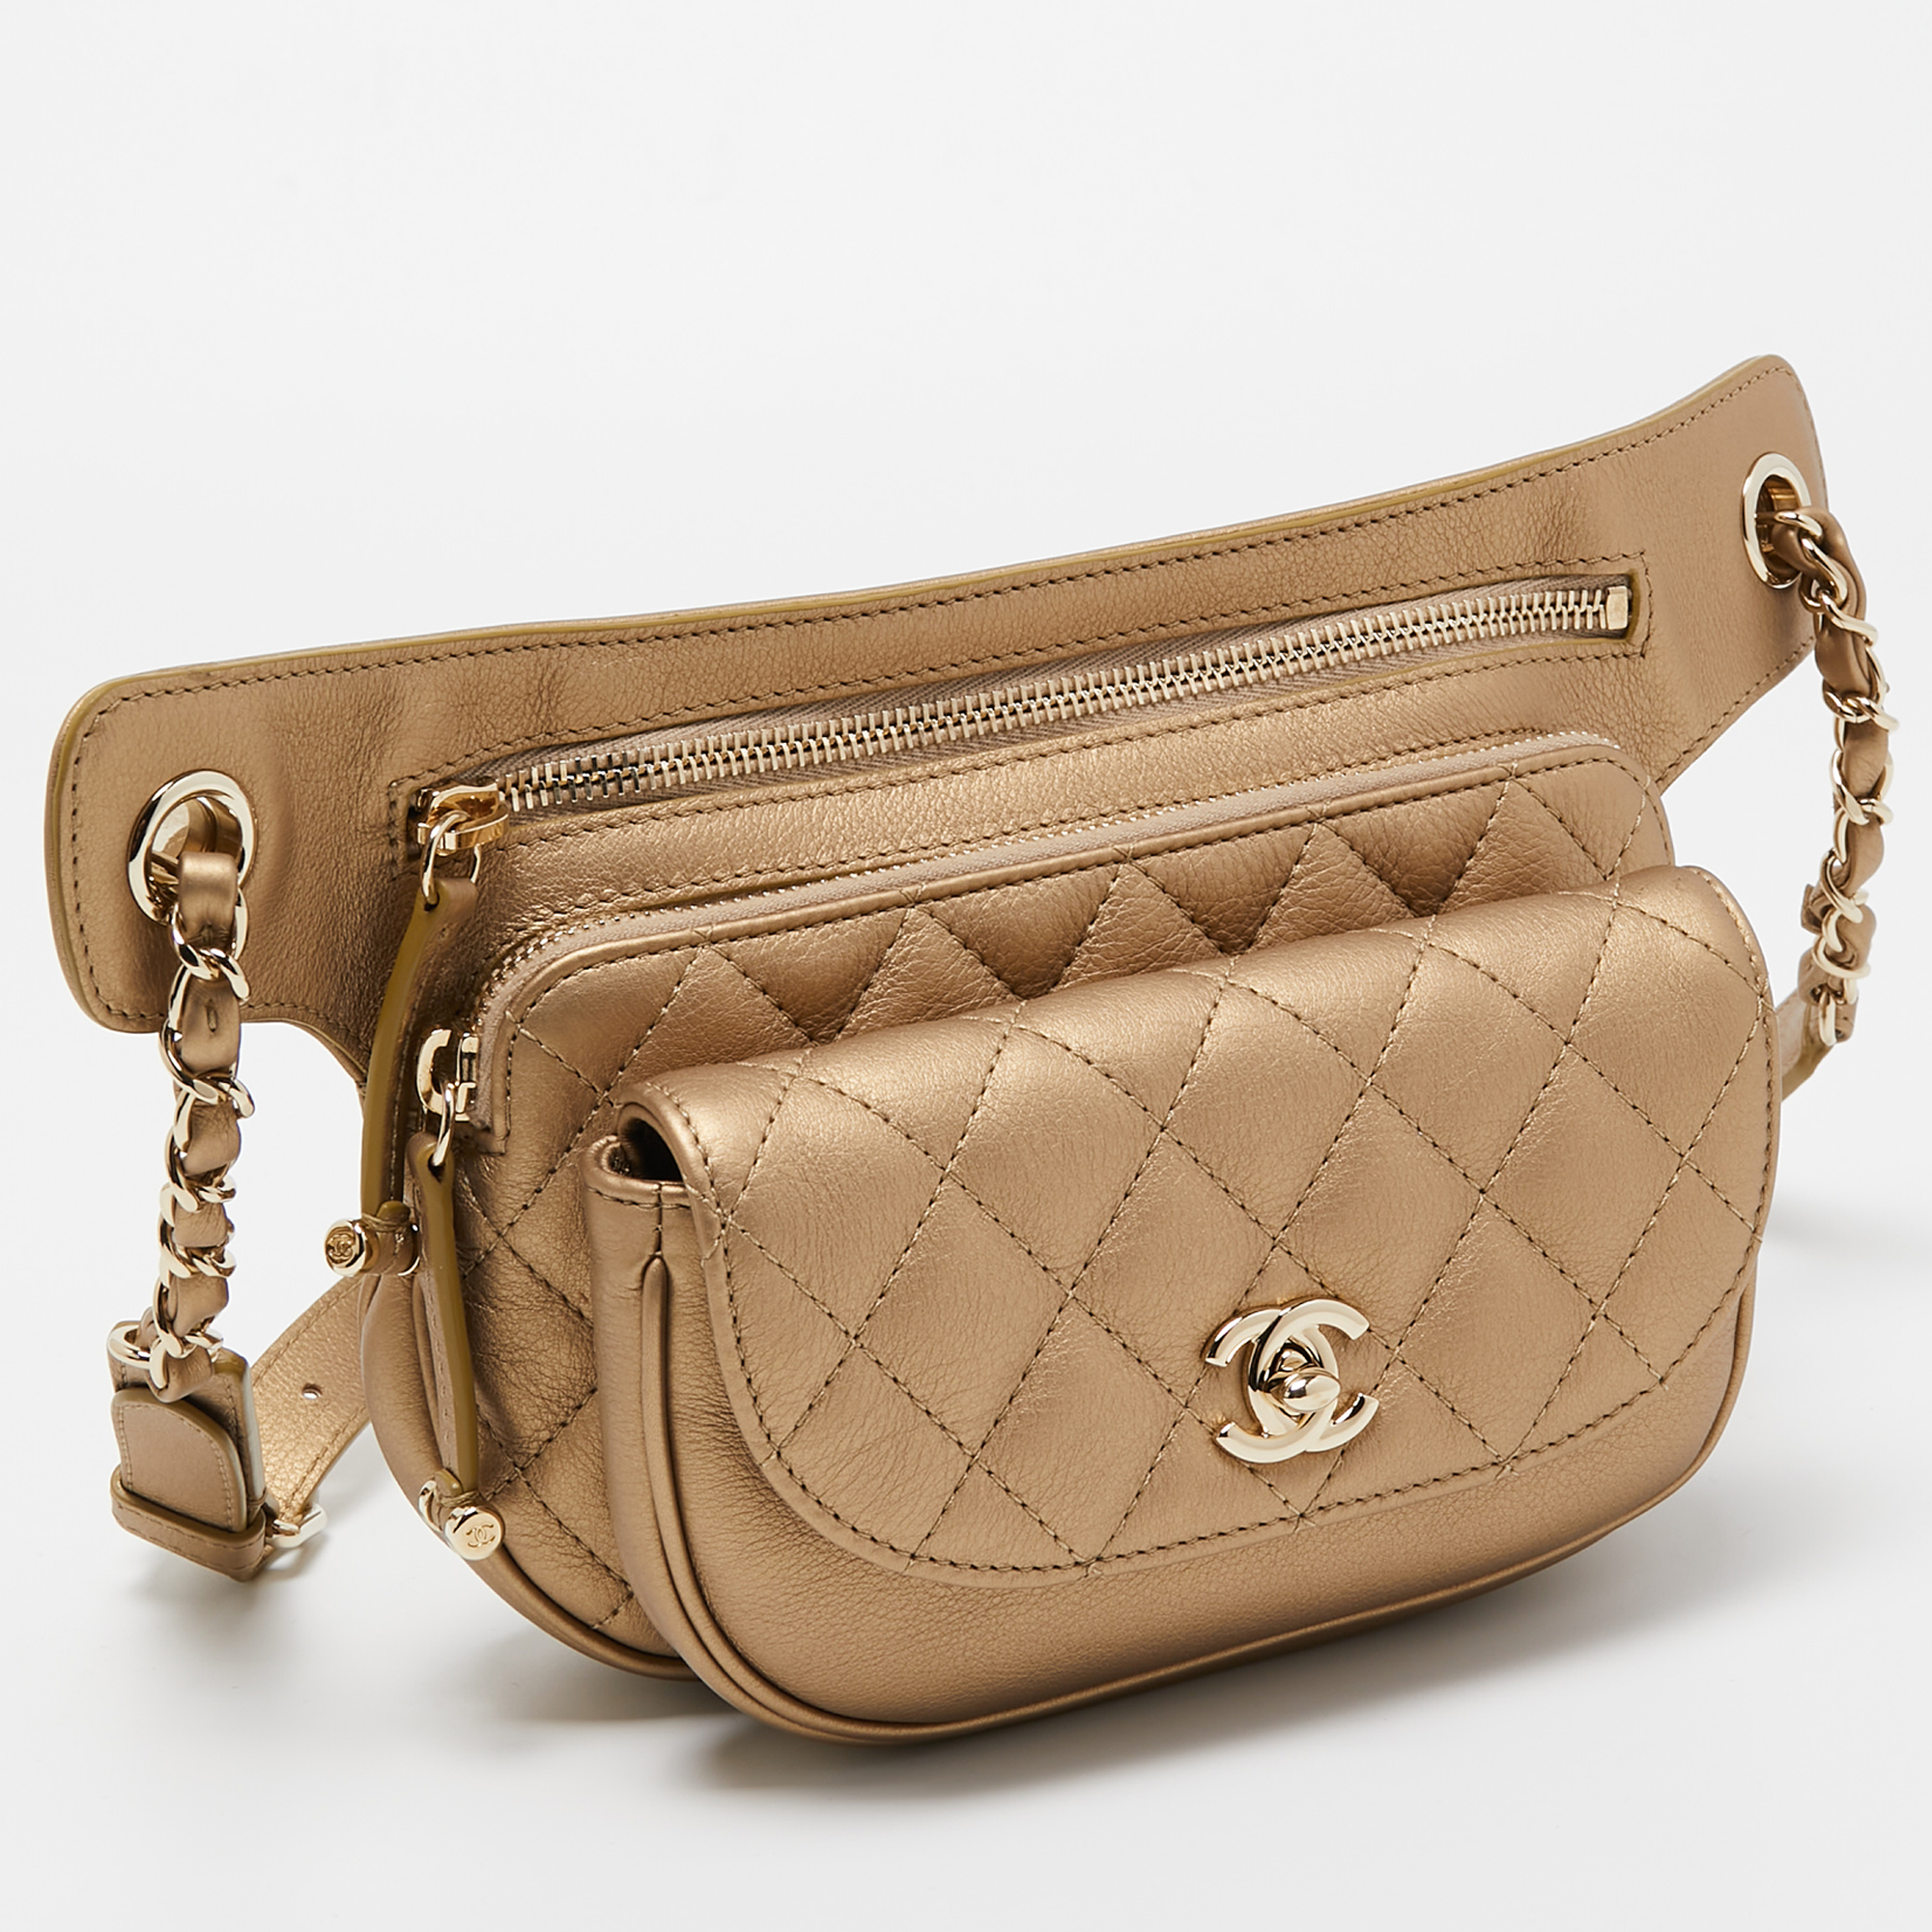 Chanel Gold Quilted Leather Chanel CC Belt Bag